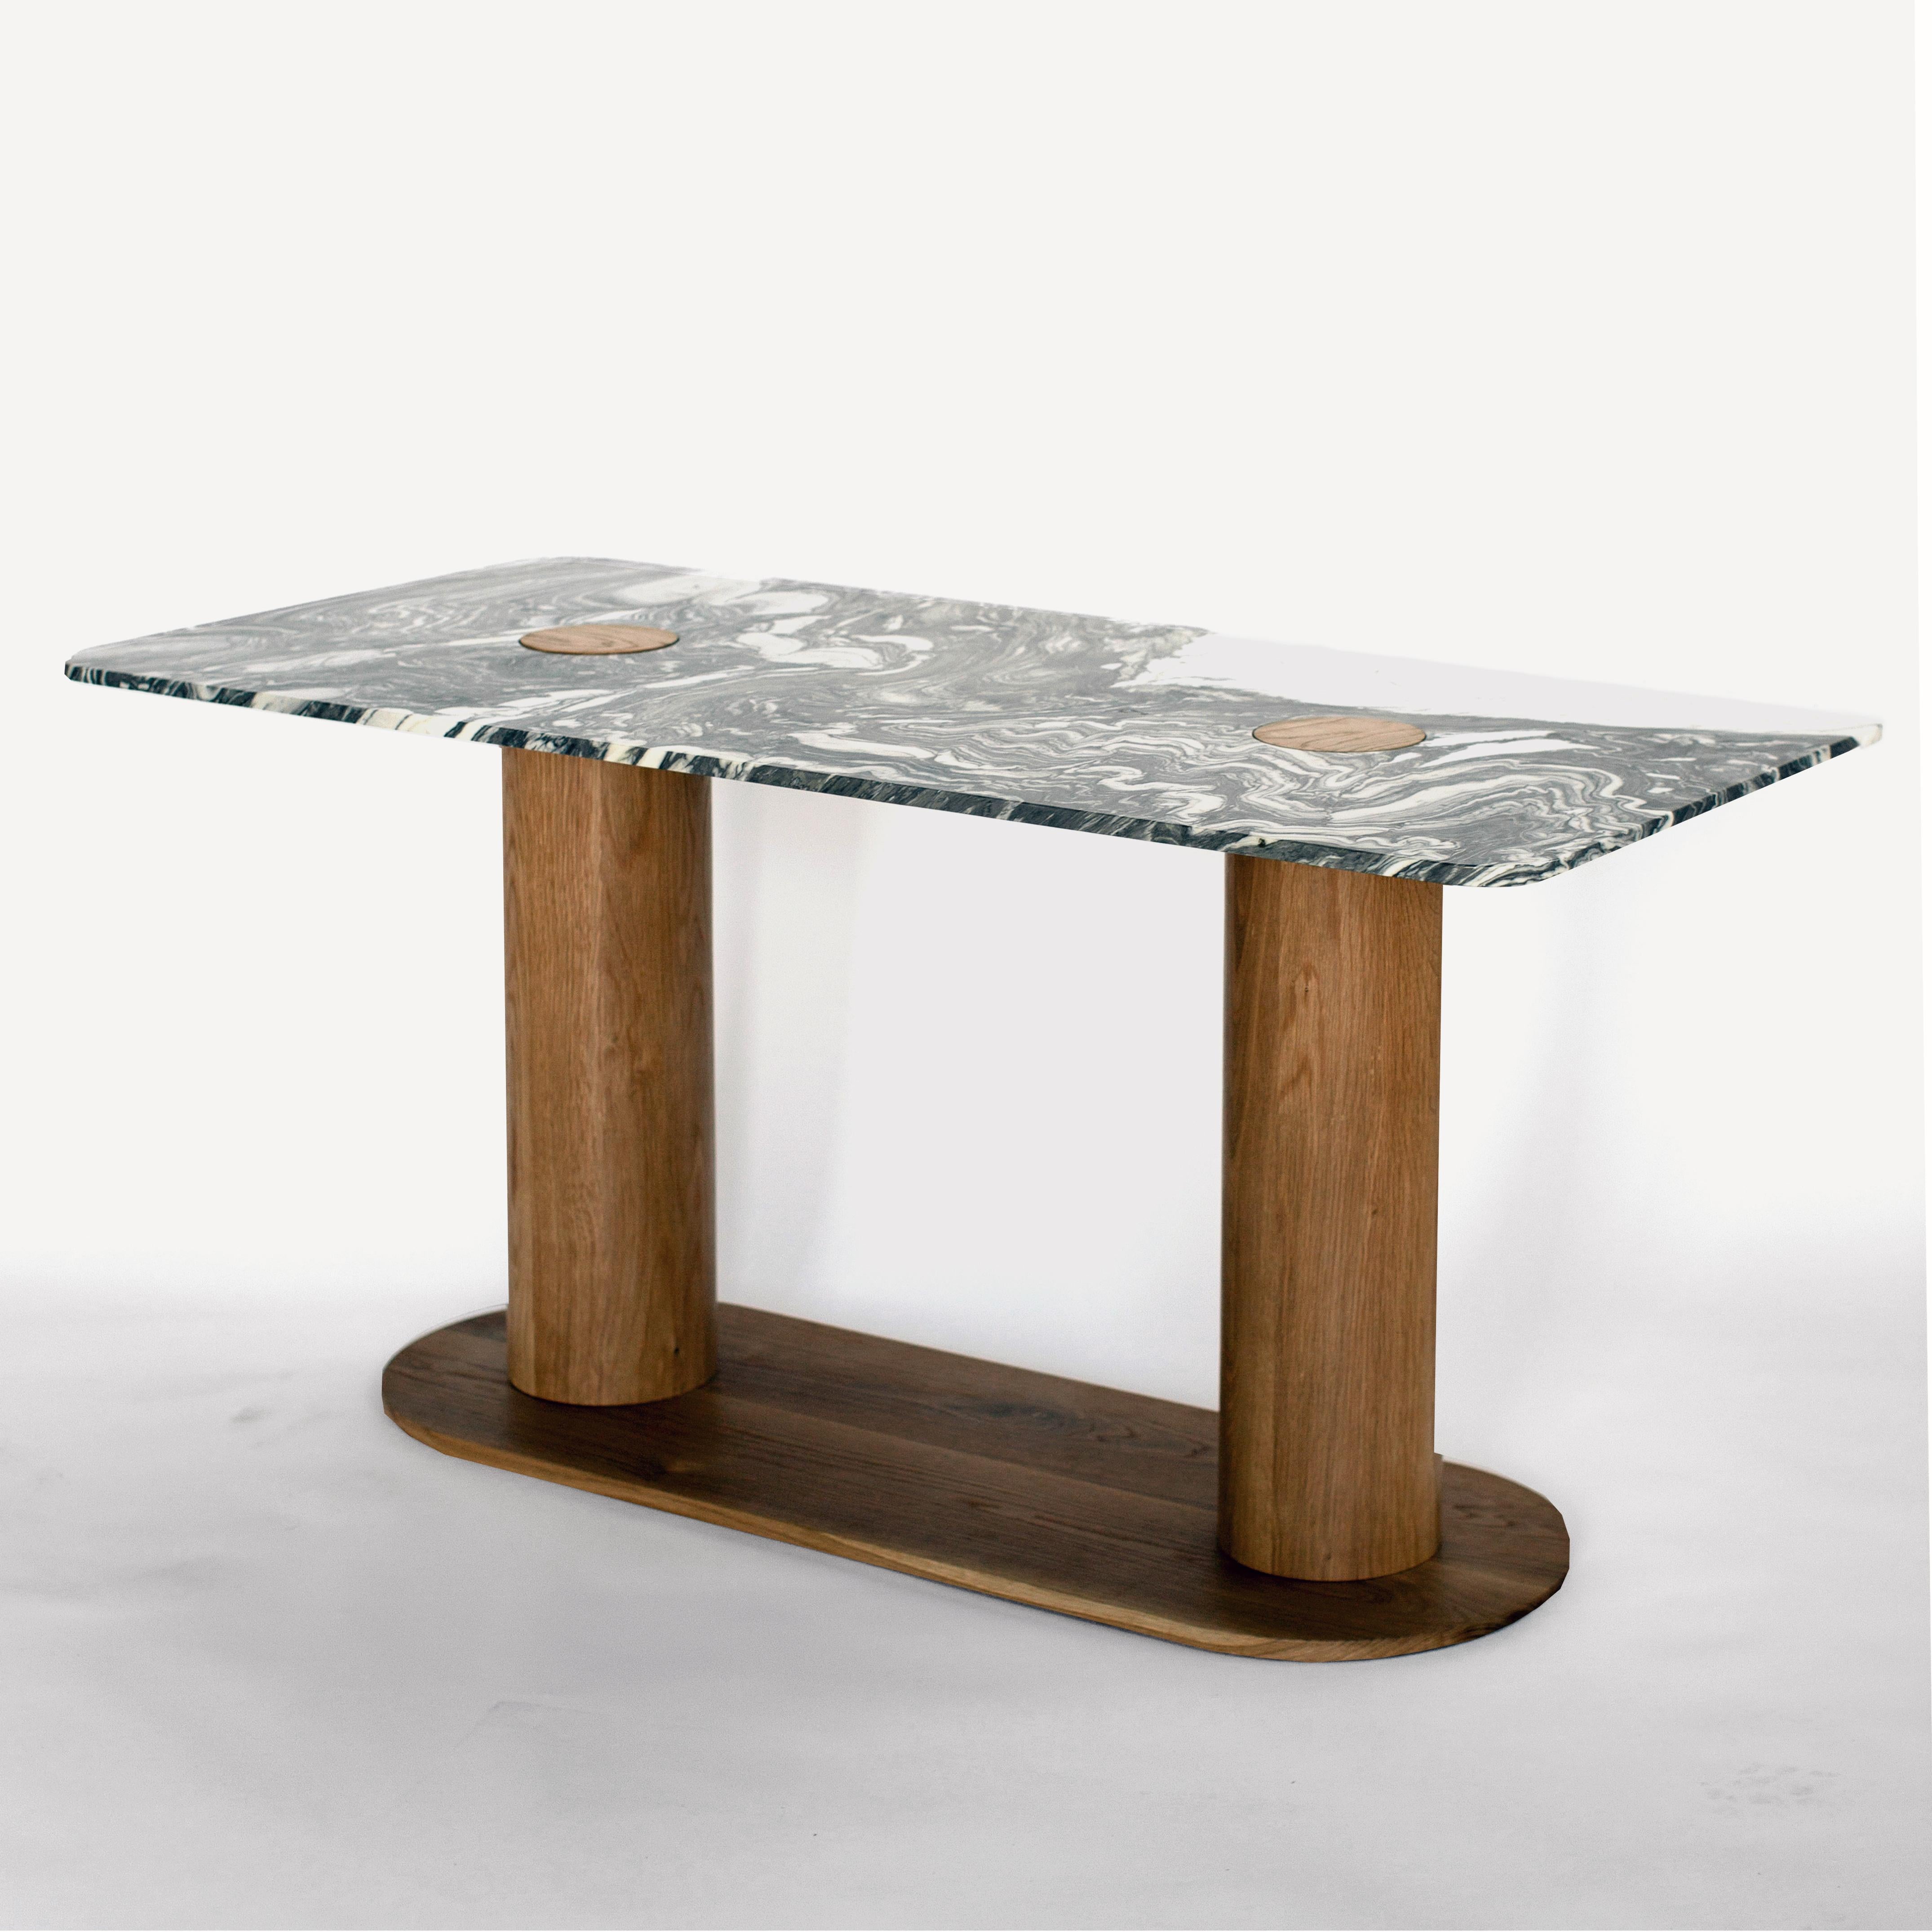 This compact dining table comes in a marble with expressive green/gray and cream white swirls. Two cutouts in the marble top reveal the materiality of the solid white oak legs below. These are hand-lathed with an oiled finish and sit on a matching